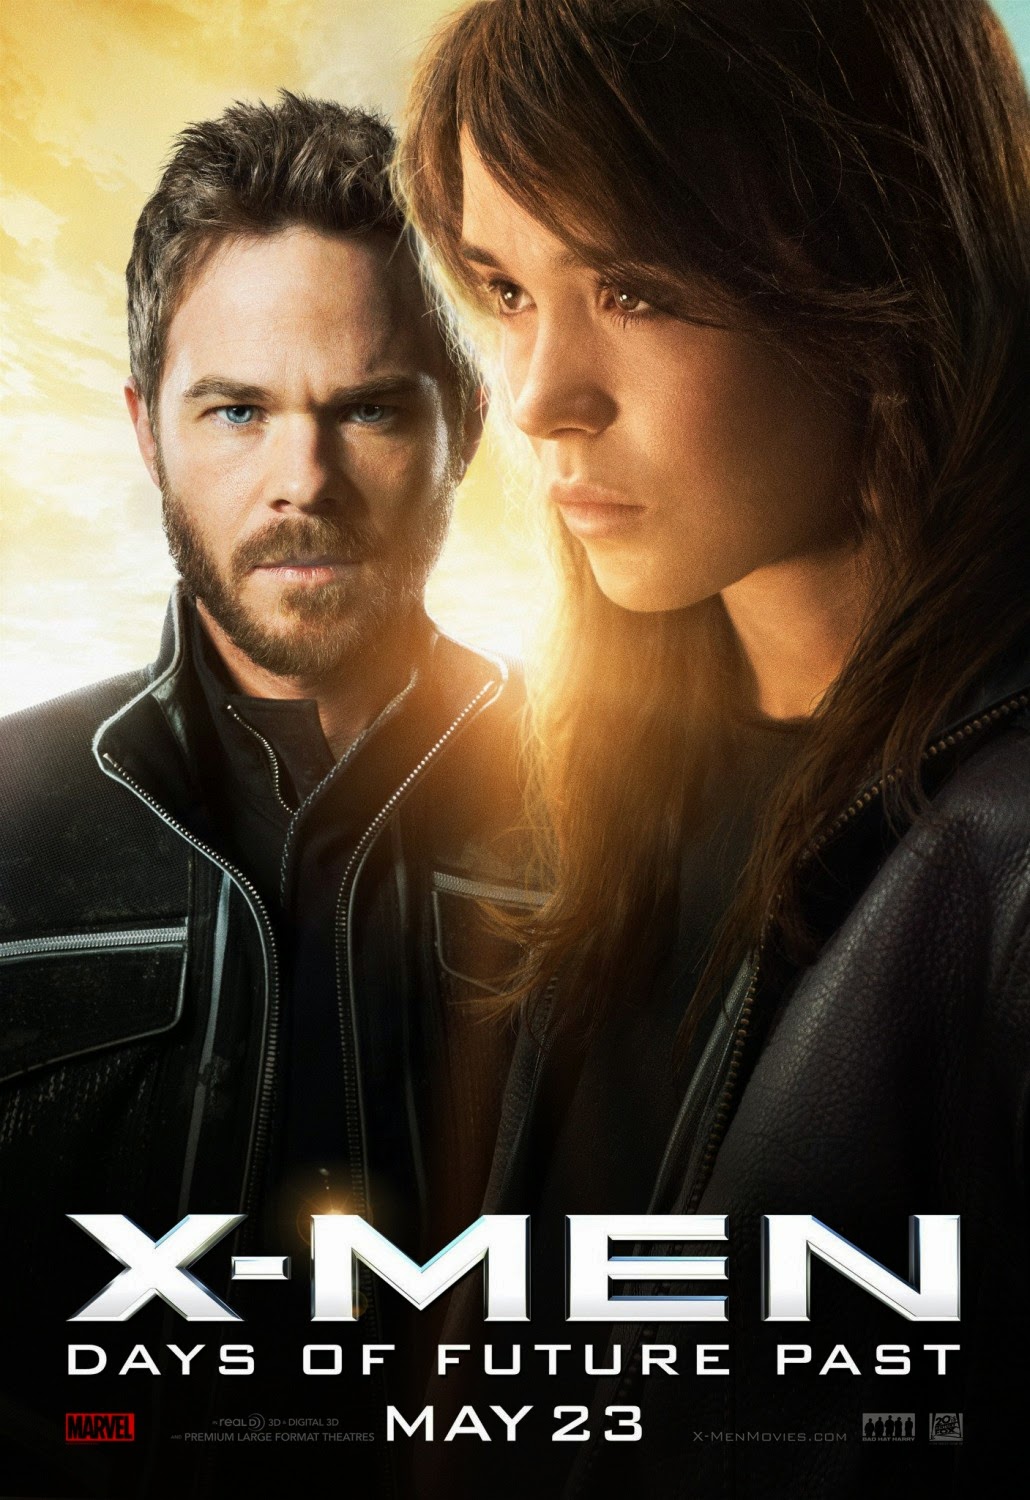 X-Men Days of Future Past Character Movie Poster Set - Shawn Ashmore as Iceman & Ellen Page as Kitty Pryde